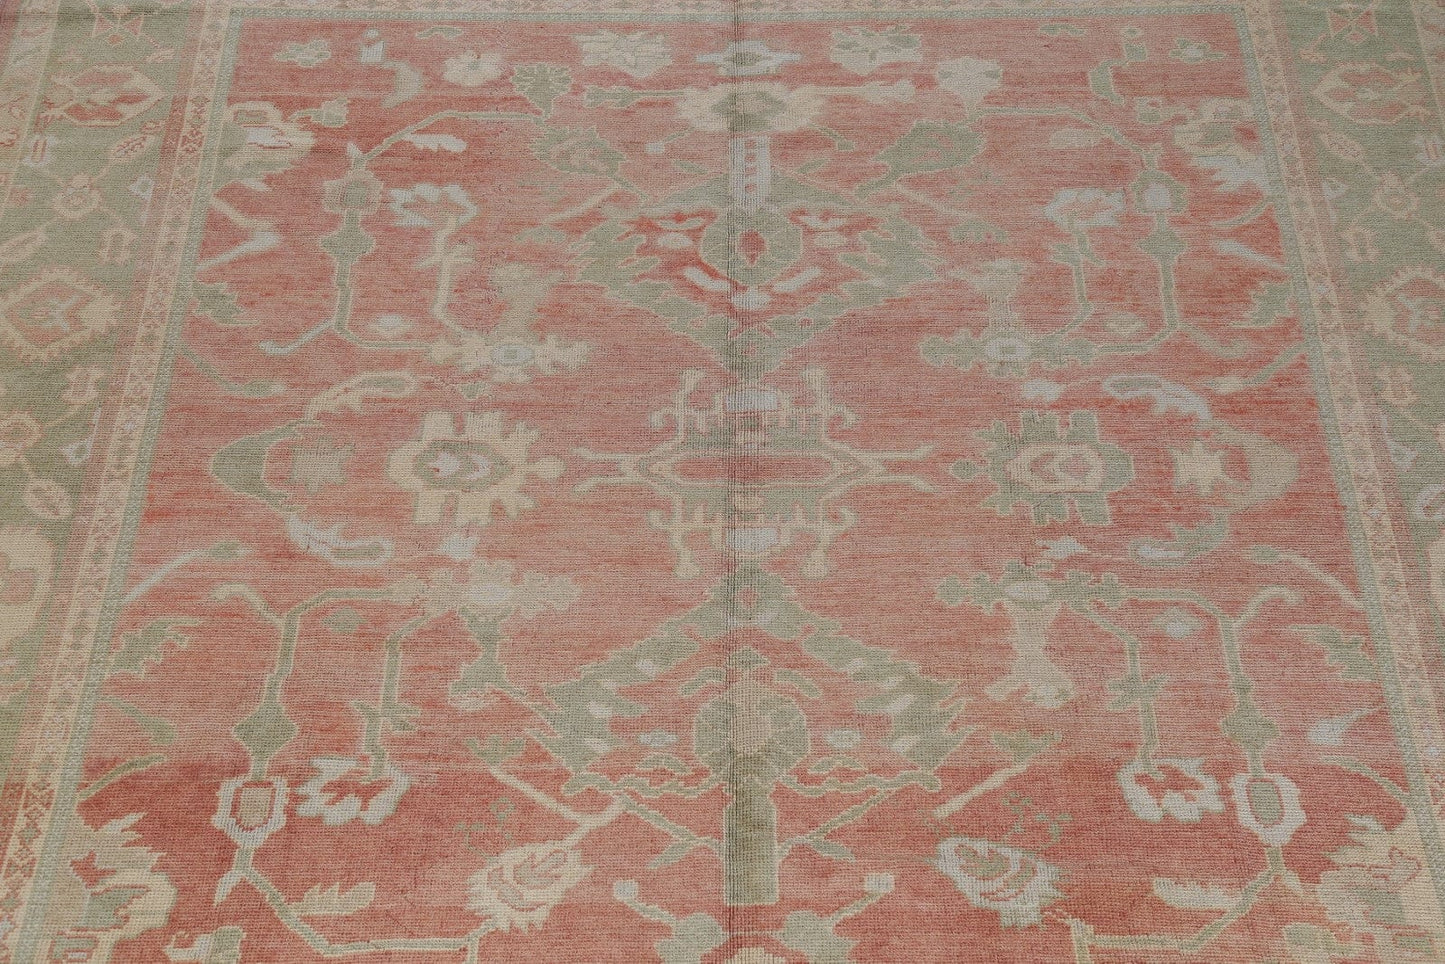 Vegetable Dye Muted Oushak Turkish Hand-Knotted Area Rug 10x12